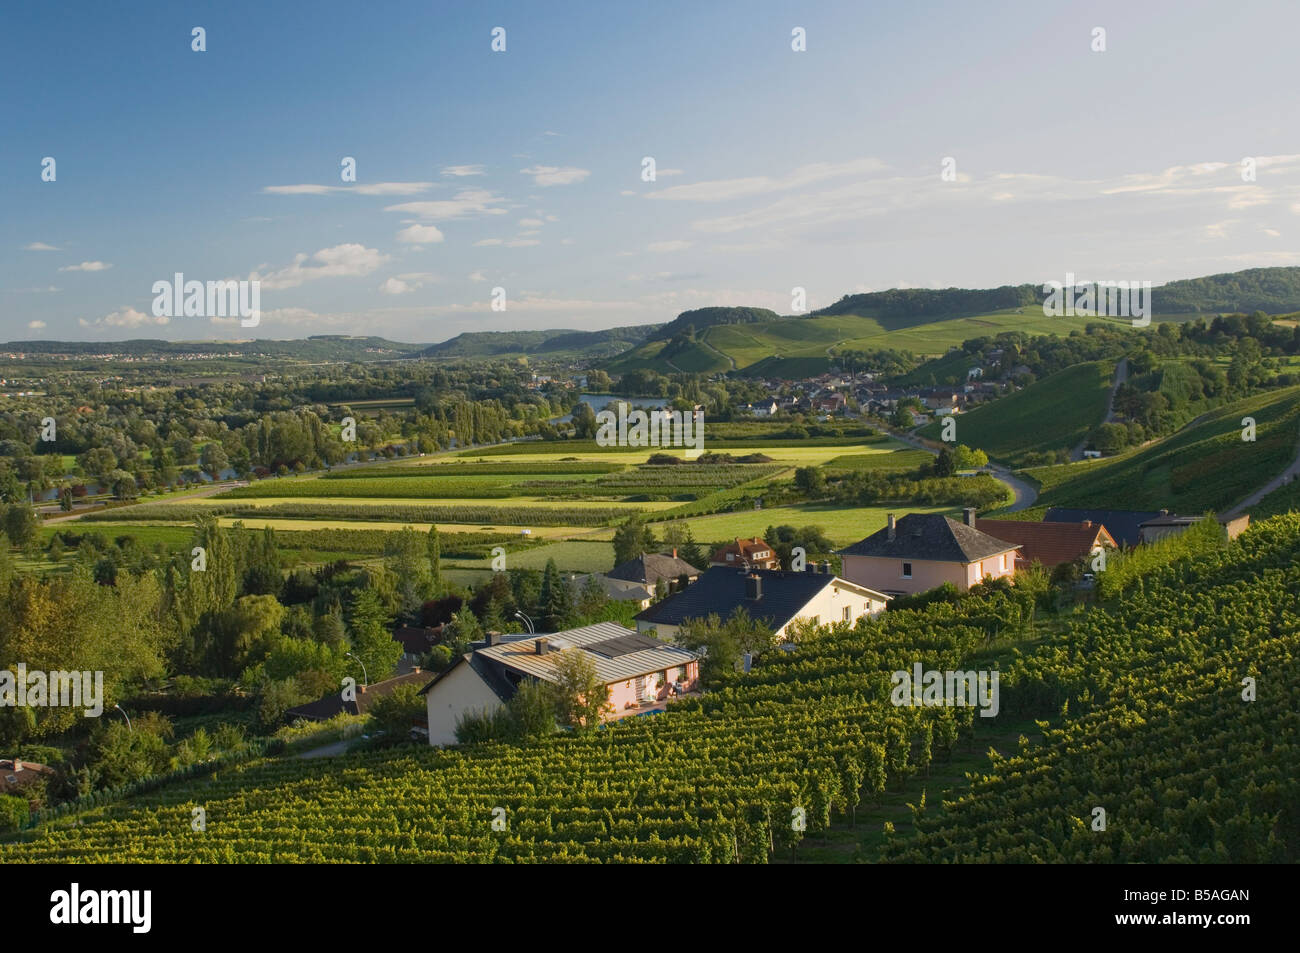 Vineyards on the banks of the Moselle river, near Remich, Luxembourg, Europe Stock Photo